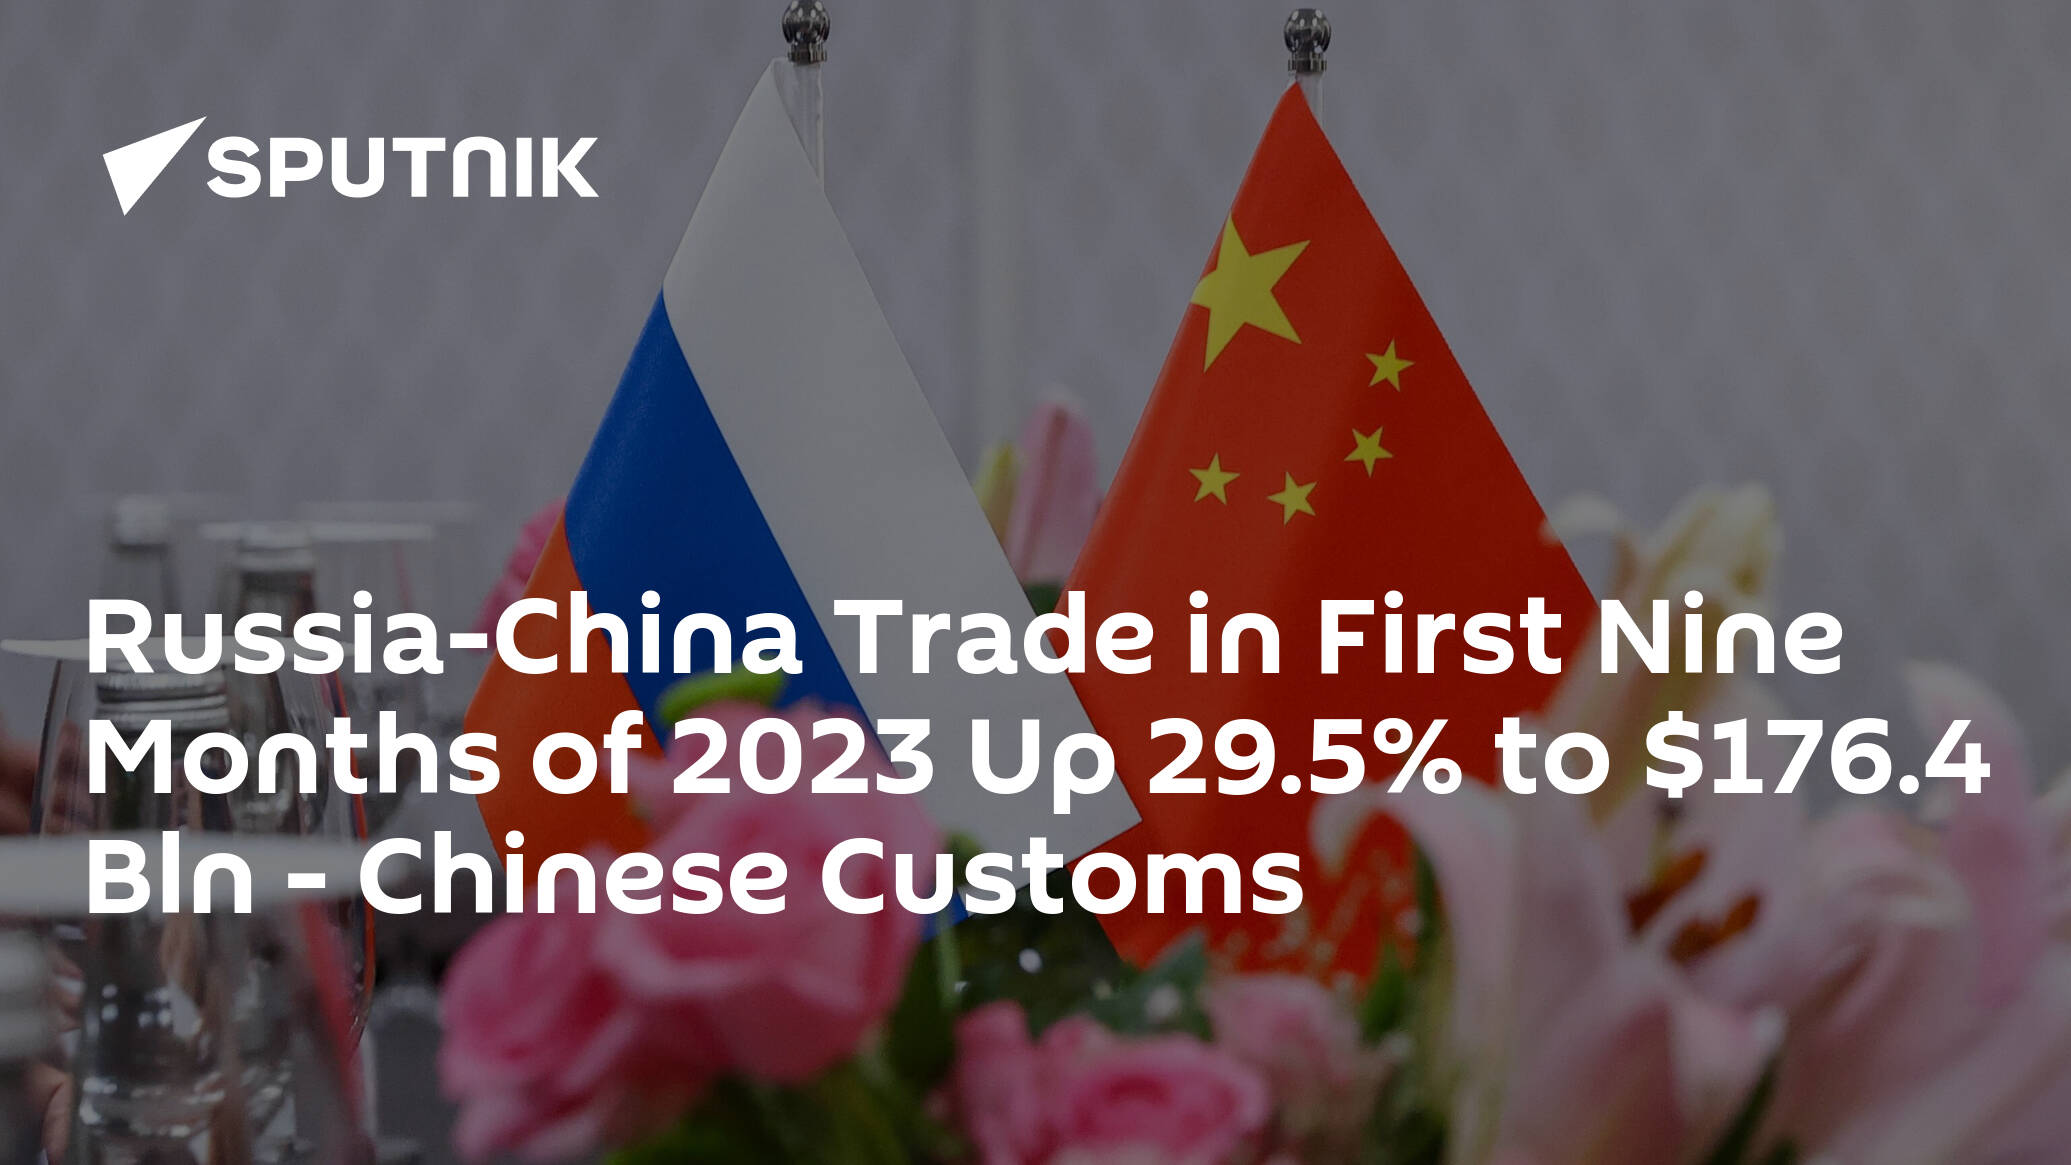 Russia-China Trade in First Nine Months of 2023 Up 29.5% to 6.4 Bln – Chinese Customs